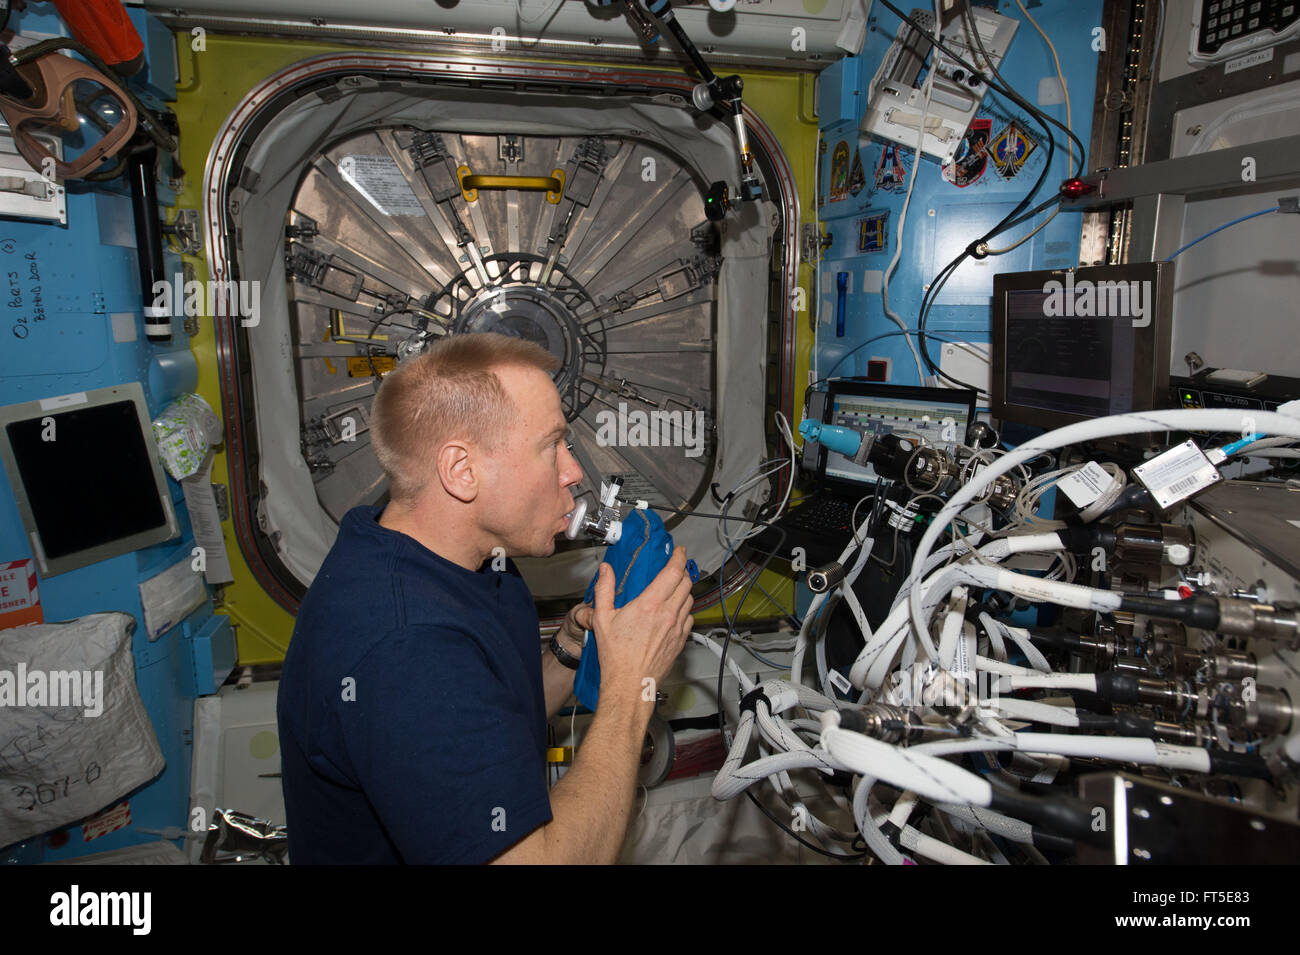 American astronaut Tim Kopra participates in the Airway Monitoring experiment aboard the International Space Station February 25, 2016 in Earth Orbit. The Airway Monitoring studies the occurrence and indicators of airway inflammation in crewmembers, using ultra-sensitive gas analyzers to analyze exhaled air. Stock Photo